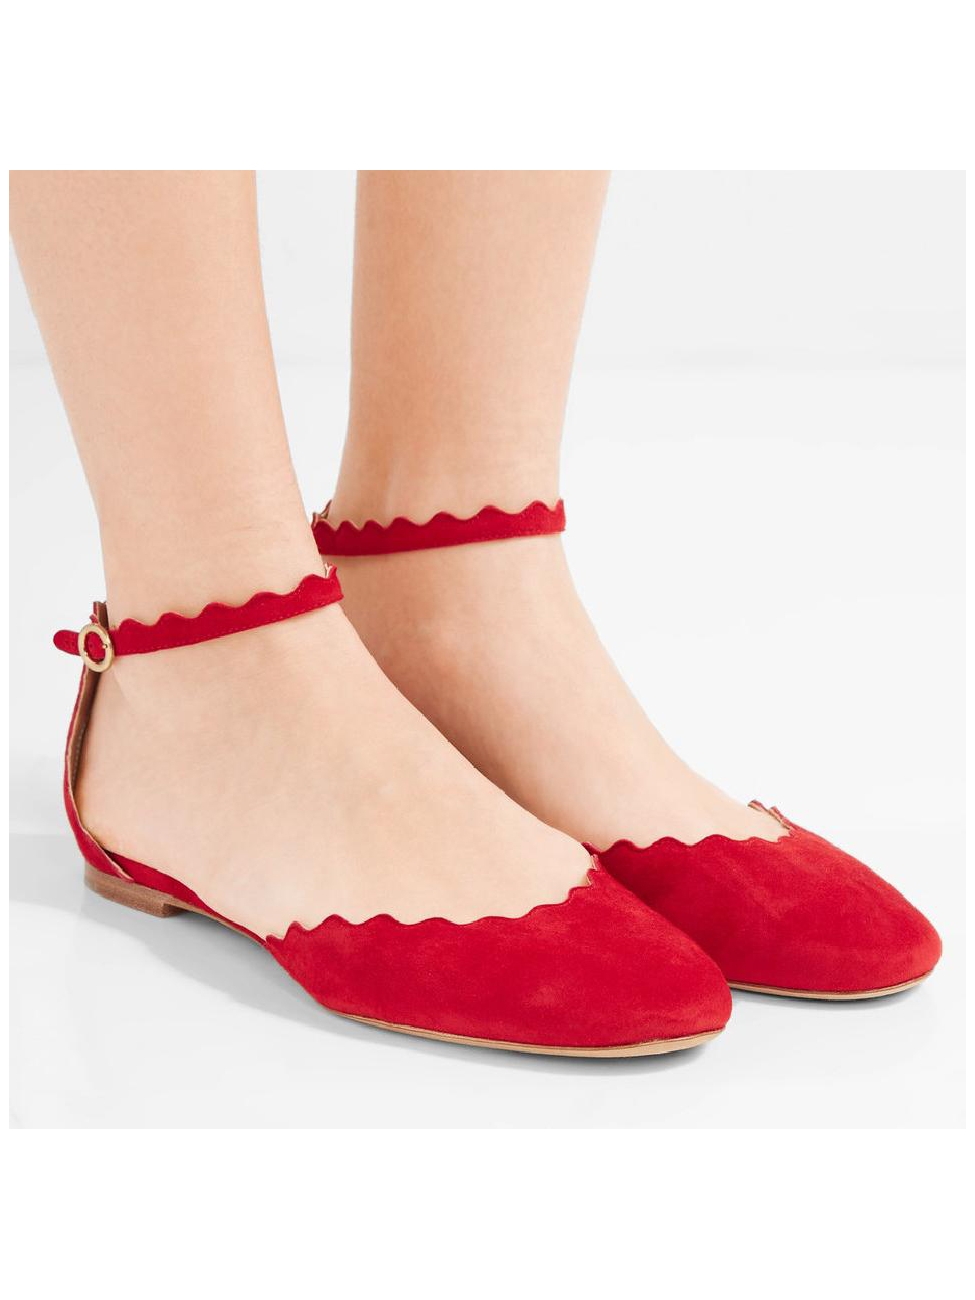 chloe-lauren-flame-red-suede-leather-scallop-edged-ballet-flats-with-ankle-strap-size-36.jpg